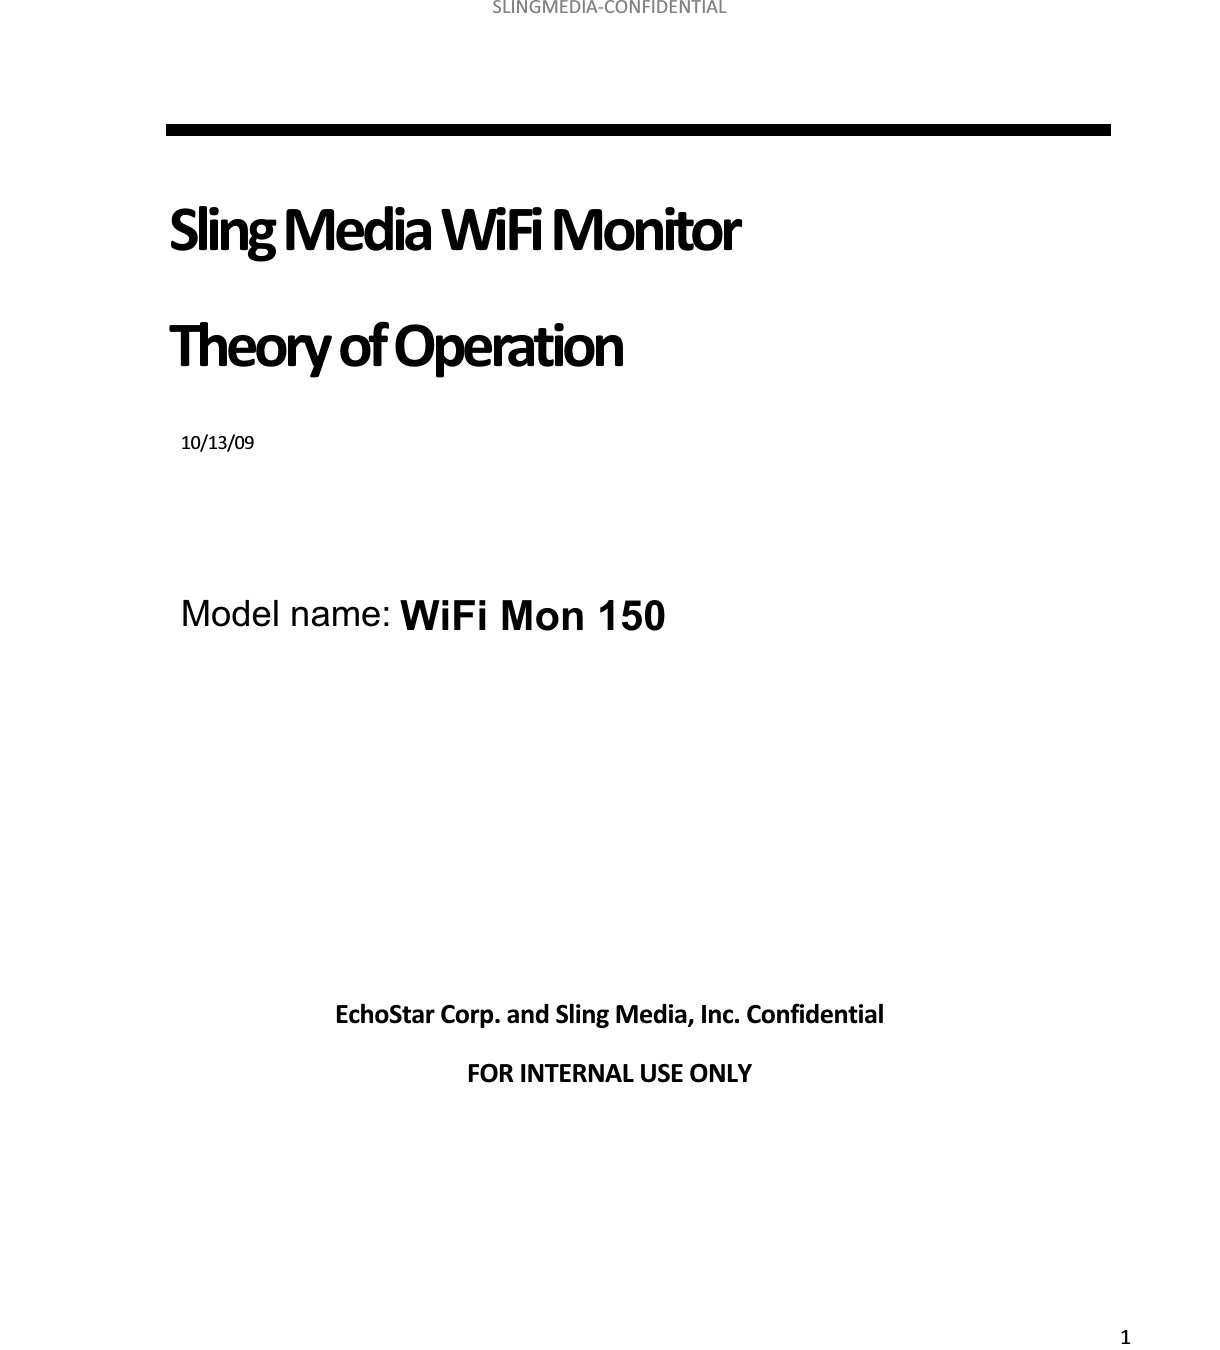 SLINGMEDIAͲCONFIDENTIAL1SlingMediaWiFiMonitorTheoryofOperation 10/13/09EchoStarCorp.andSlingMedia,Inc.ConfidentialFORINTERNALUSEONLYModel name: 150 WiFi Mon 150 